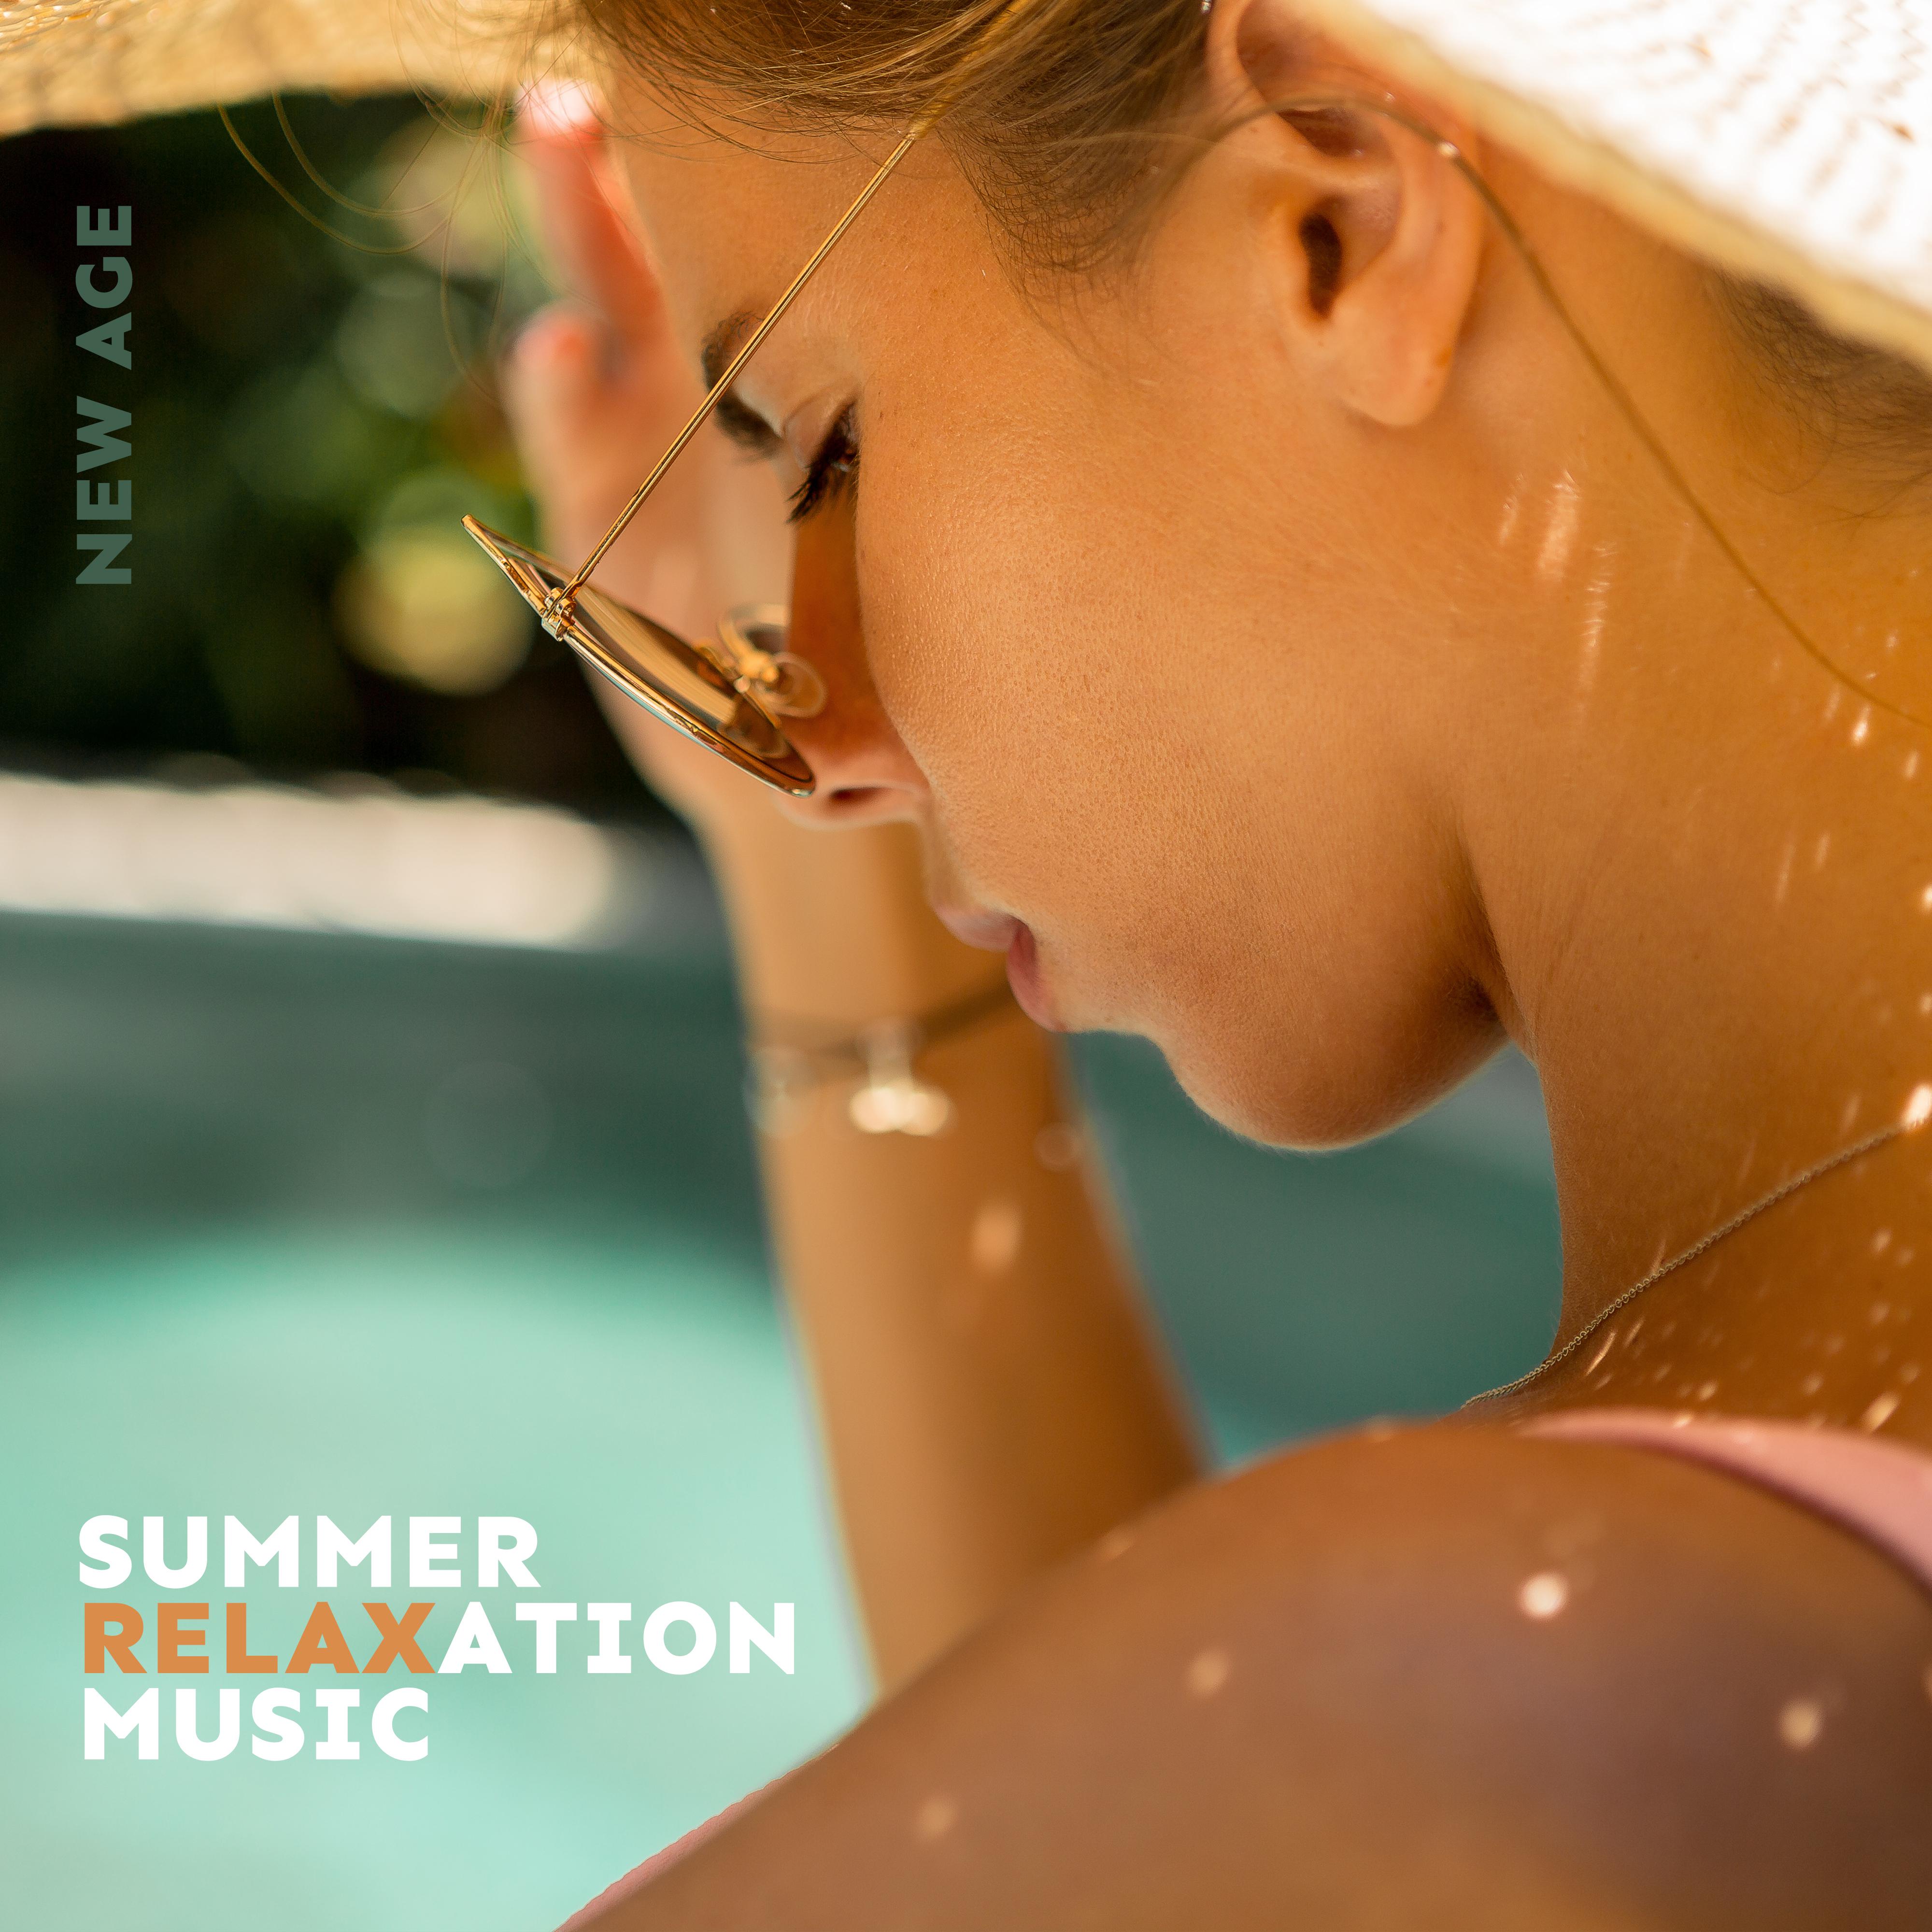 New Age Summer Relaxation Music (Relaxing Sounds of the Sea, Singing of Forest Birds, the Sounds of a Gentle Wind, Nature at Night and Others)